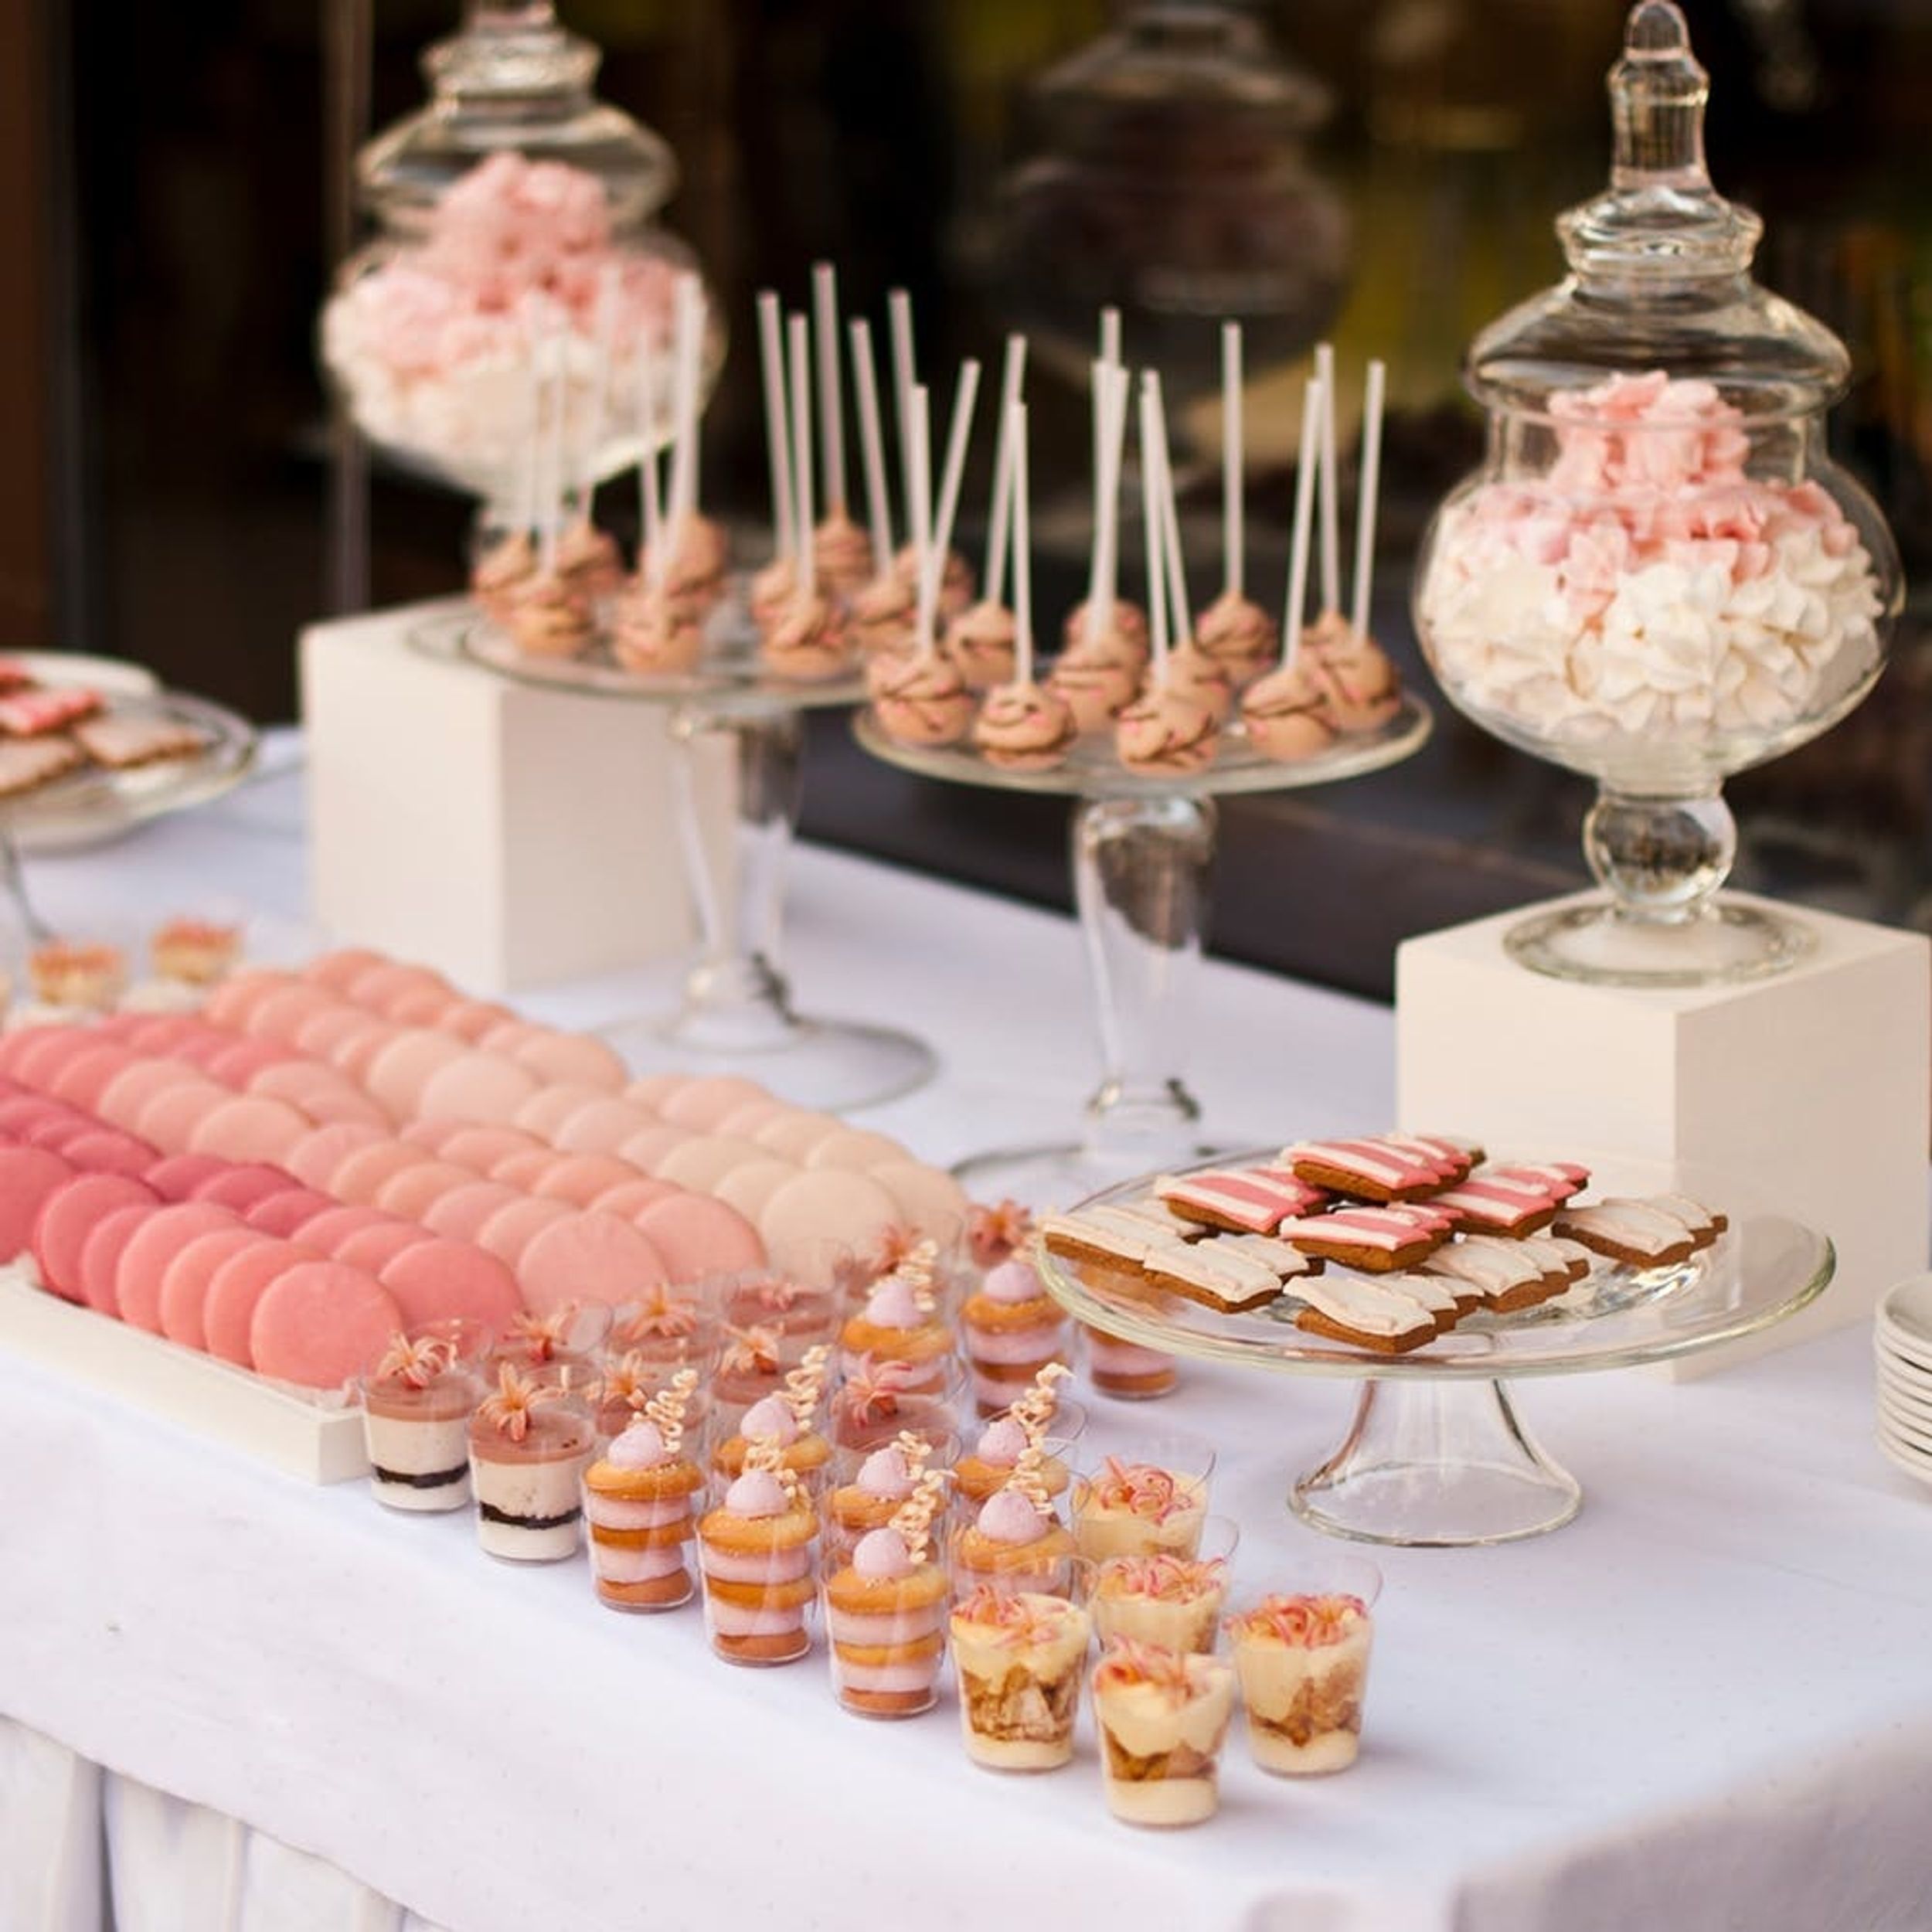 11 Creative Wedding Buffet Ideas to Personalize Your Reception